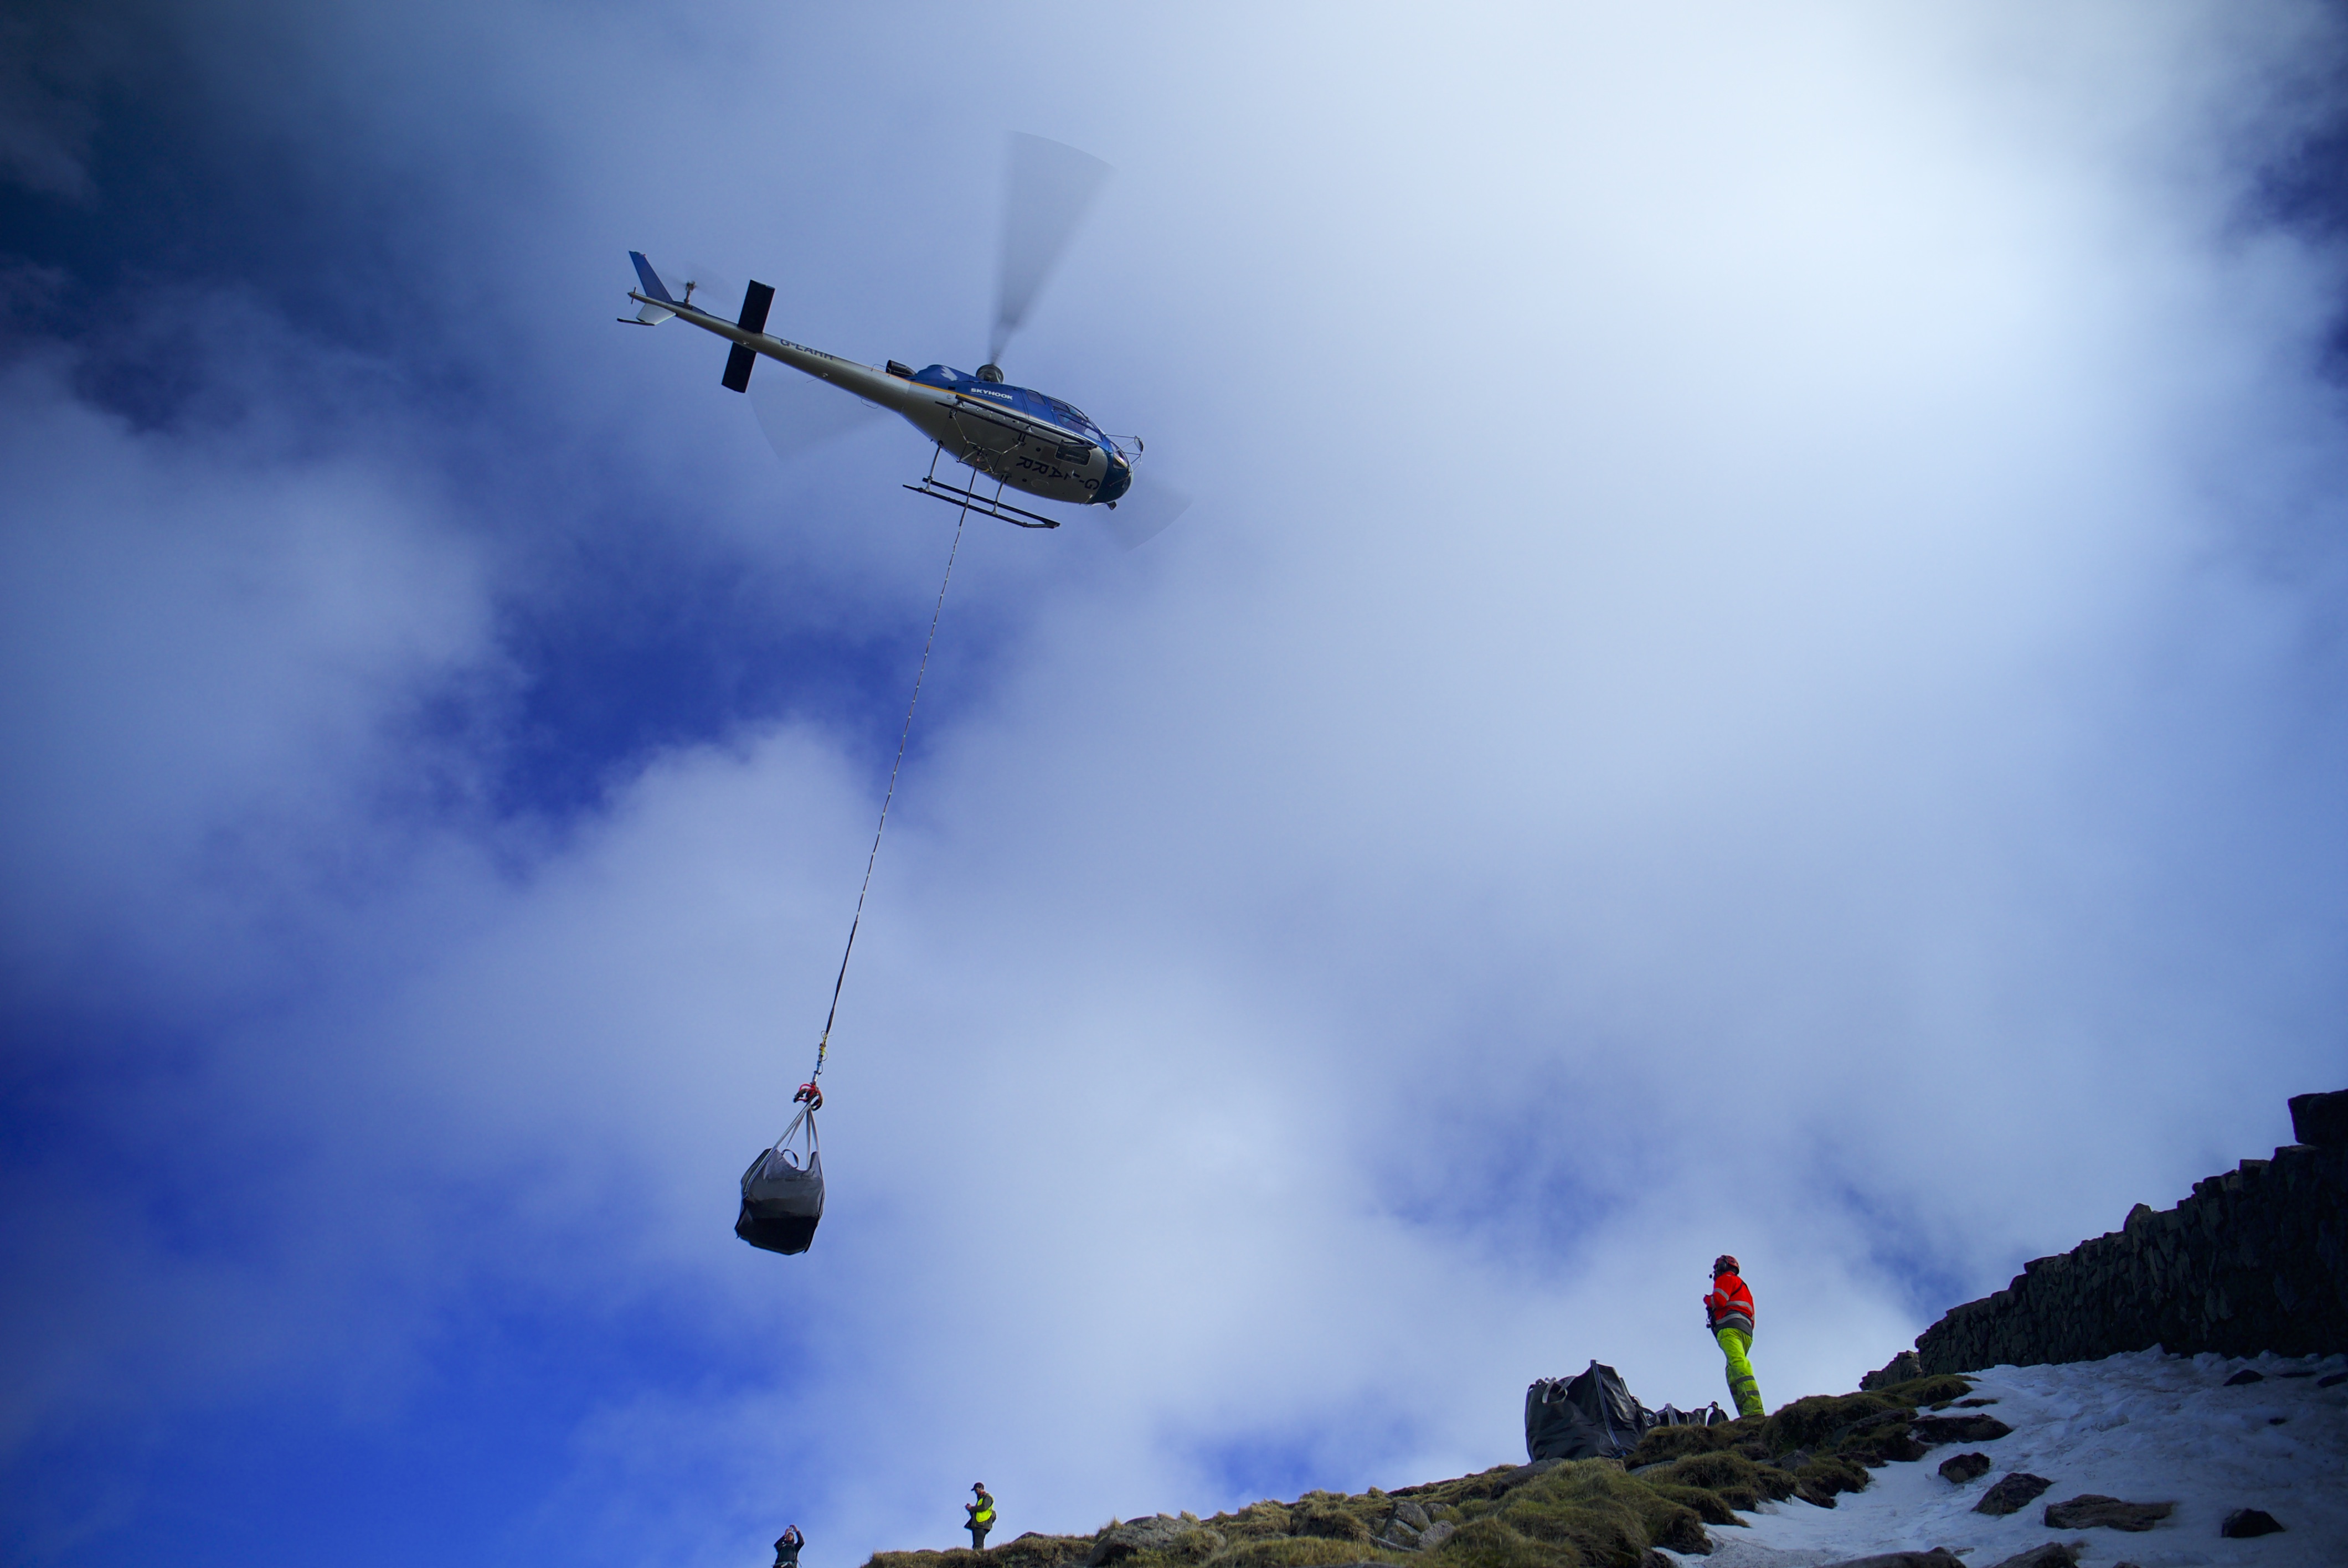 First phase of Mourne Wall Helicopter Drops Complete | NI Water News